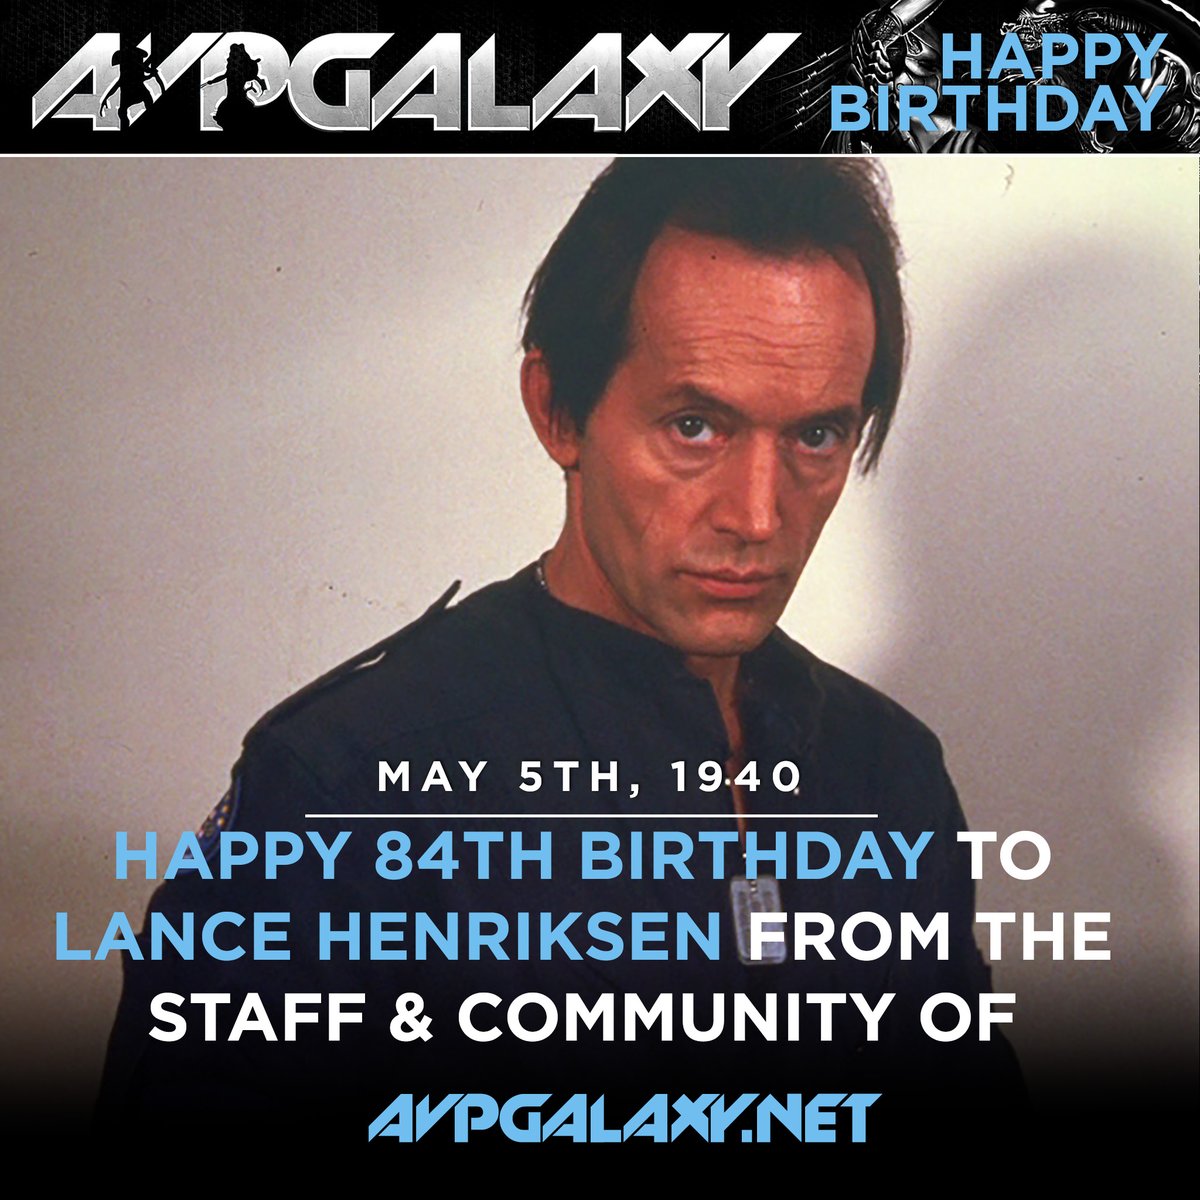 The staff and community of Alien vs. Predator Galaxy would like to wish the amazing and iconic Lance Henriksen a happy 84th birthday! #LanceHenriksen #Aliens #Alien3 #AlienvsPredator #HappyBirthday #HappyBurstday